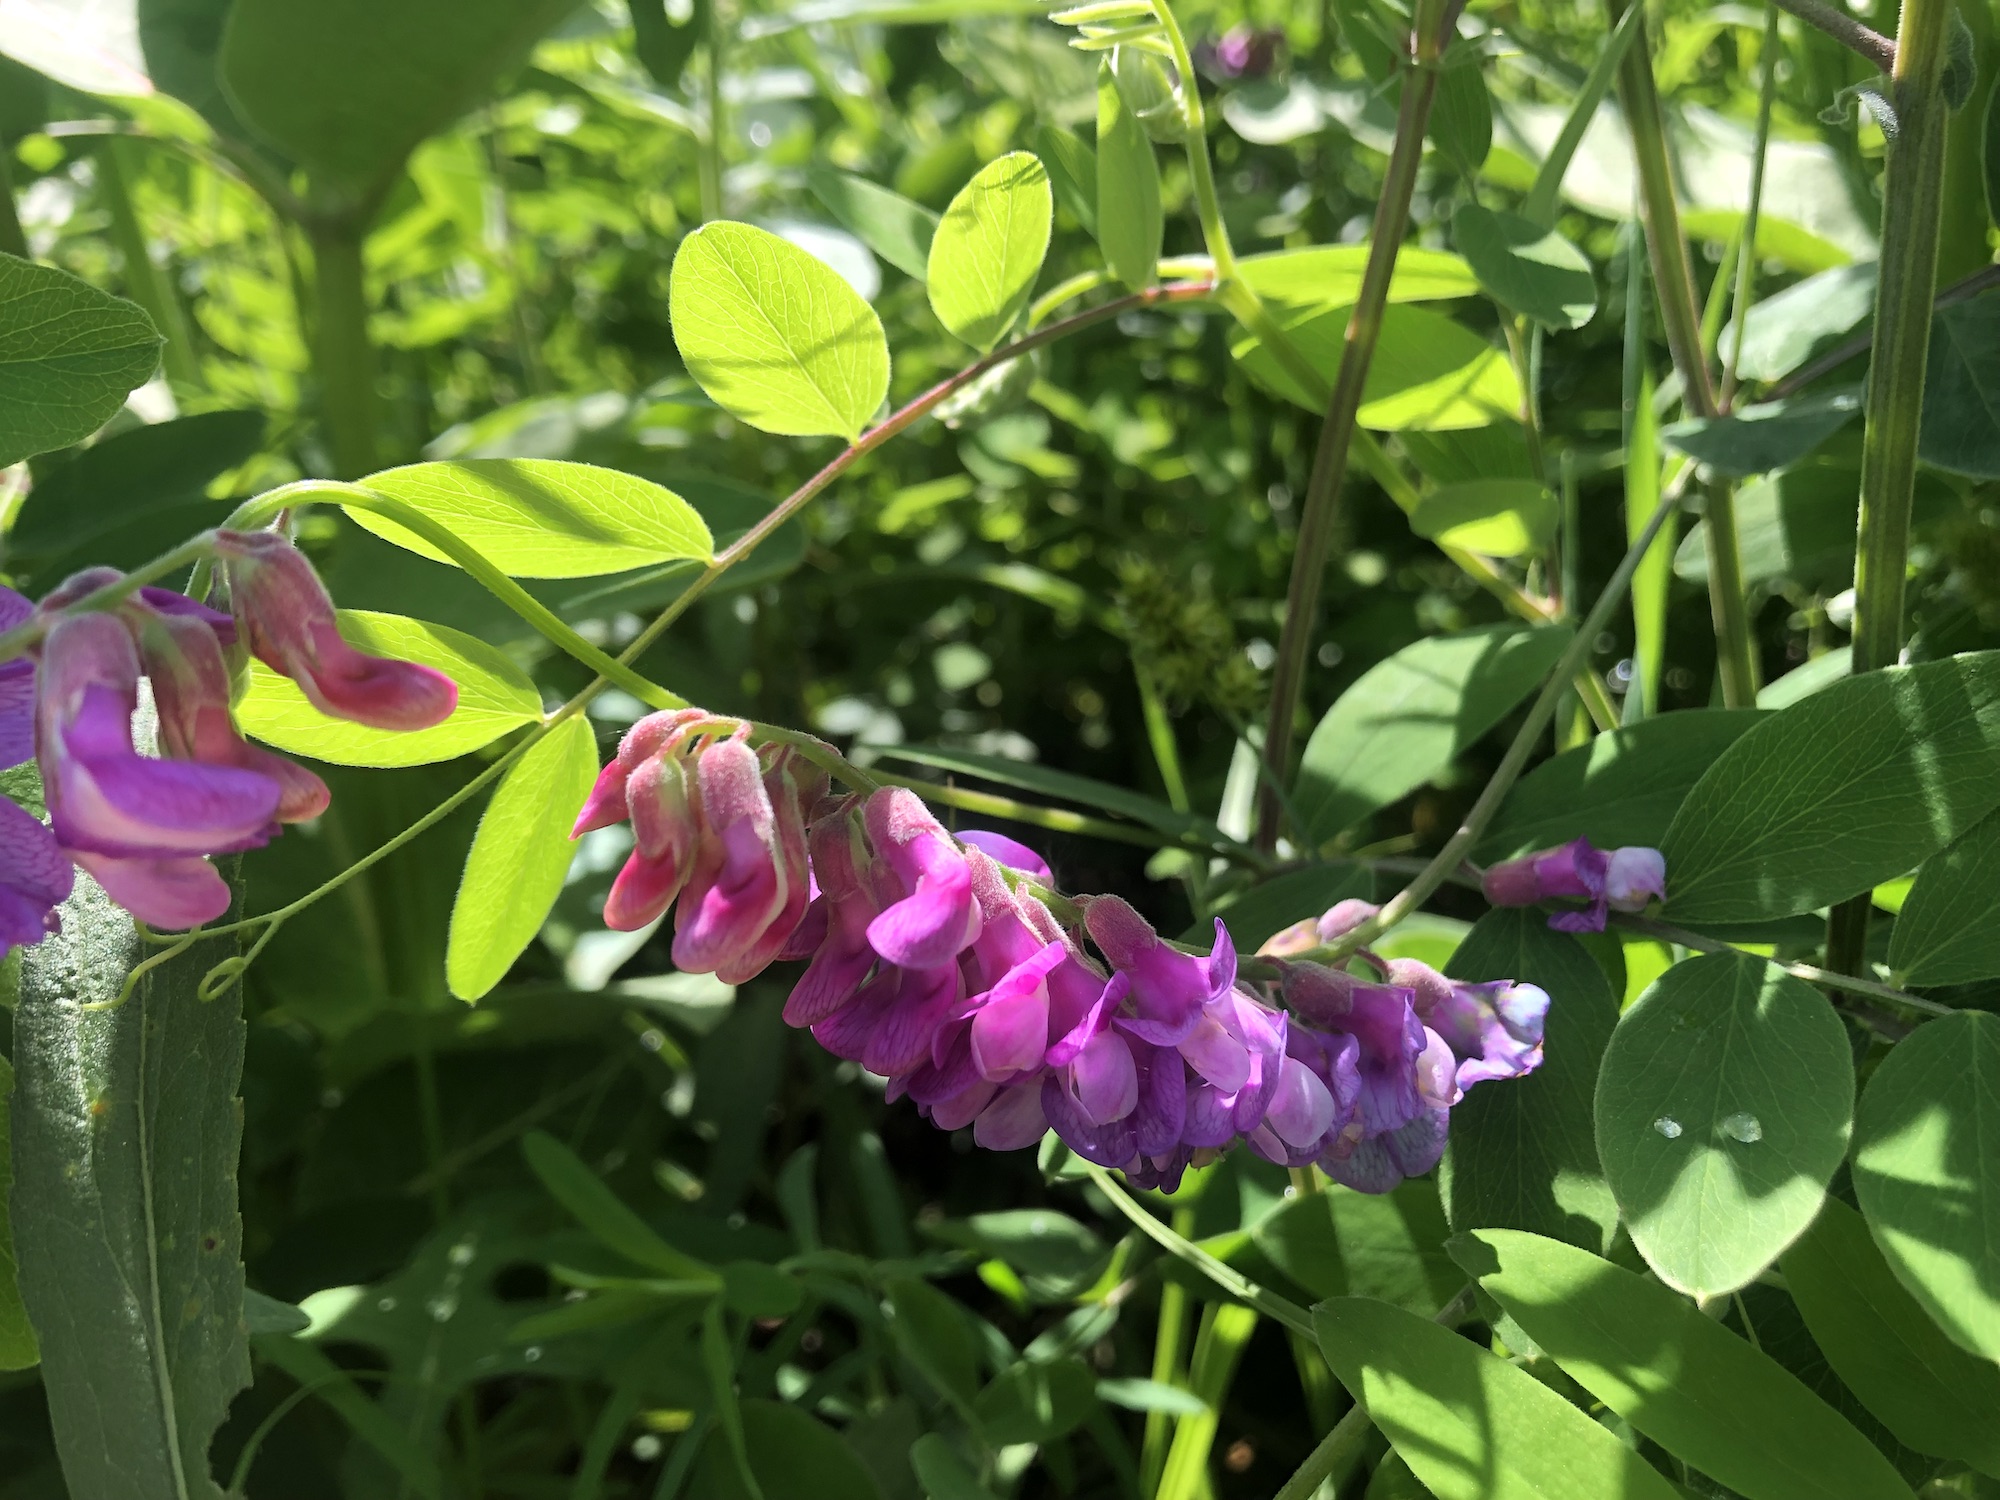 Veiny Pea in the Curtis Prairie in the University of Wisconsin-Madison Arboretum in Madison, Wisconsin on June 9, 2022.